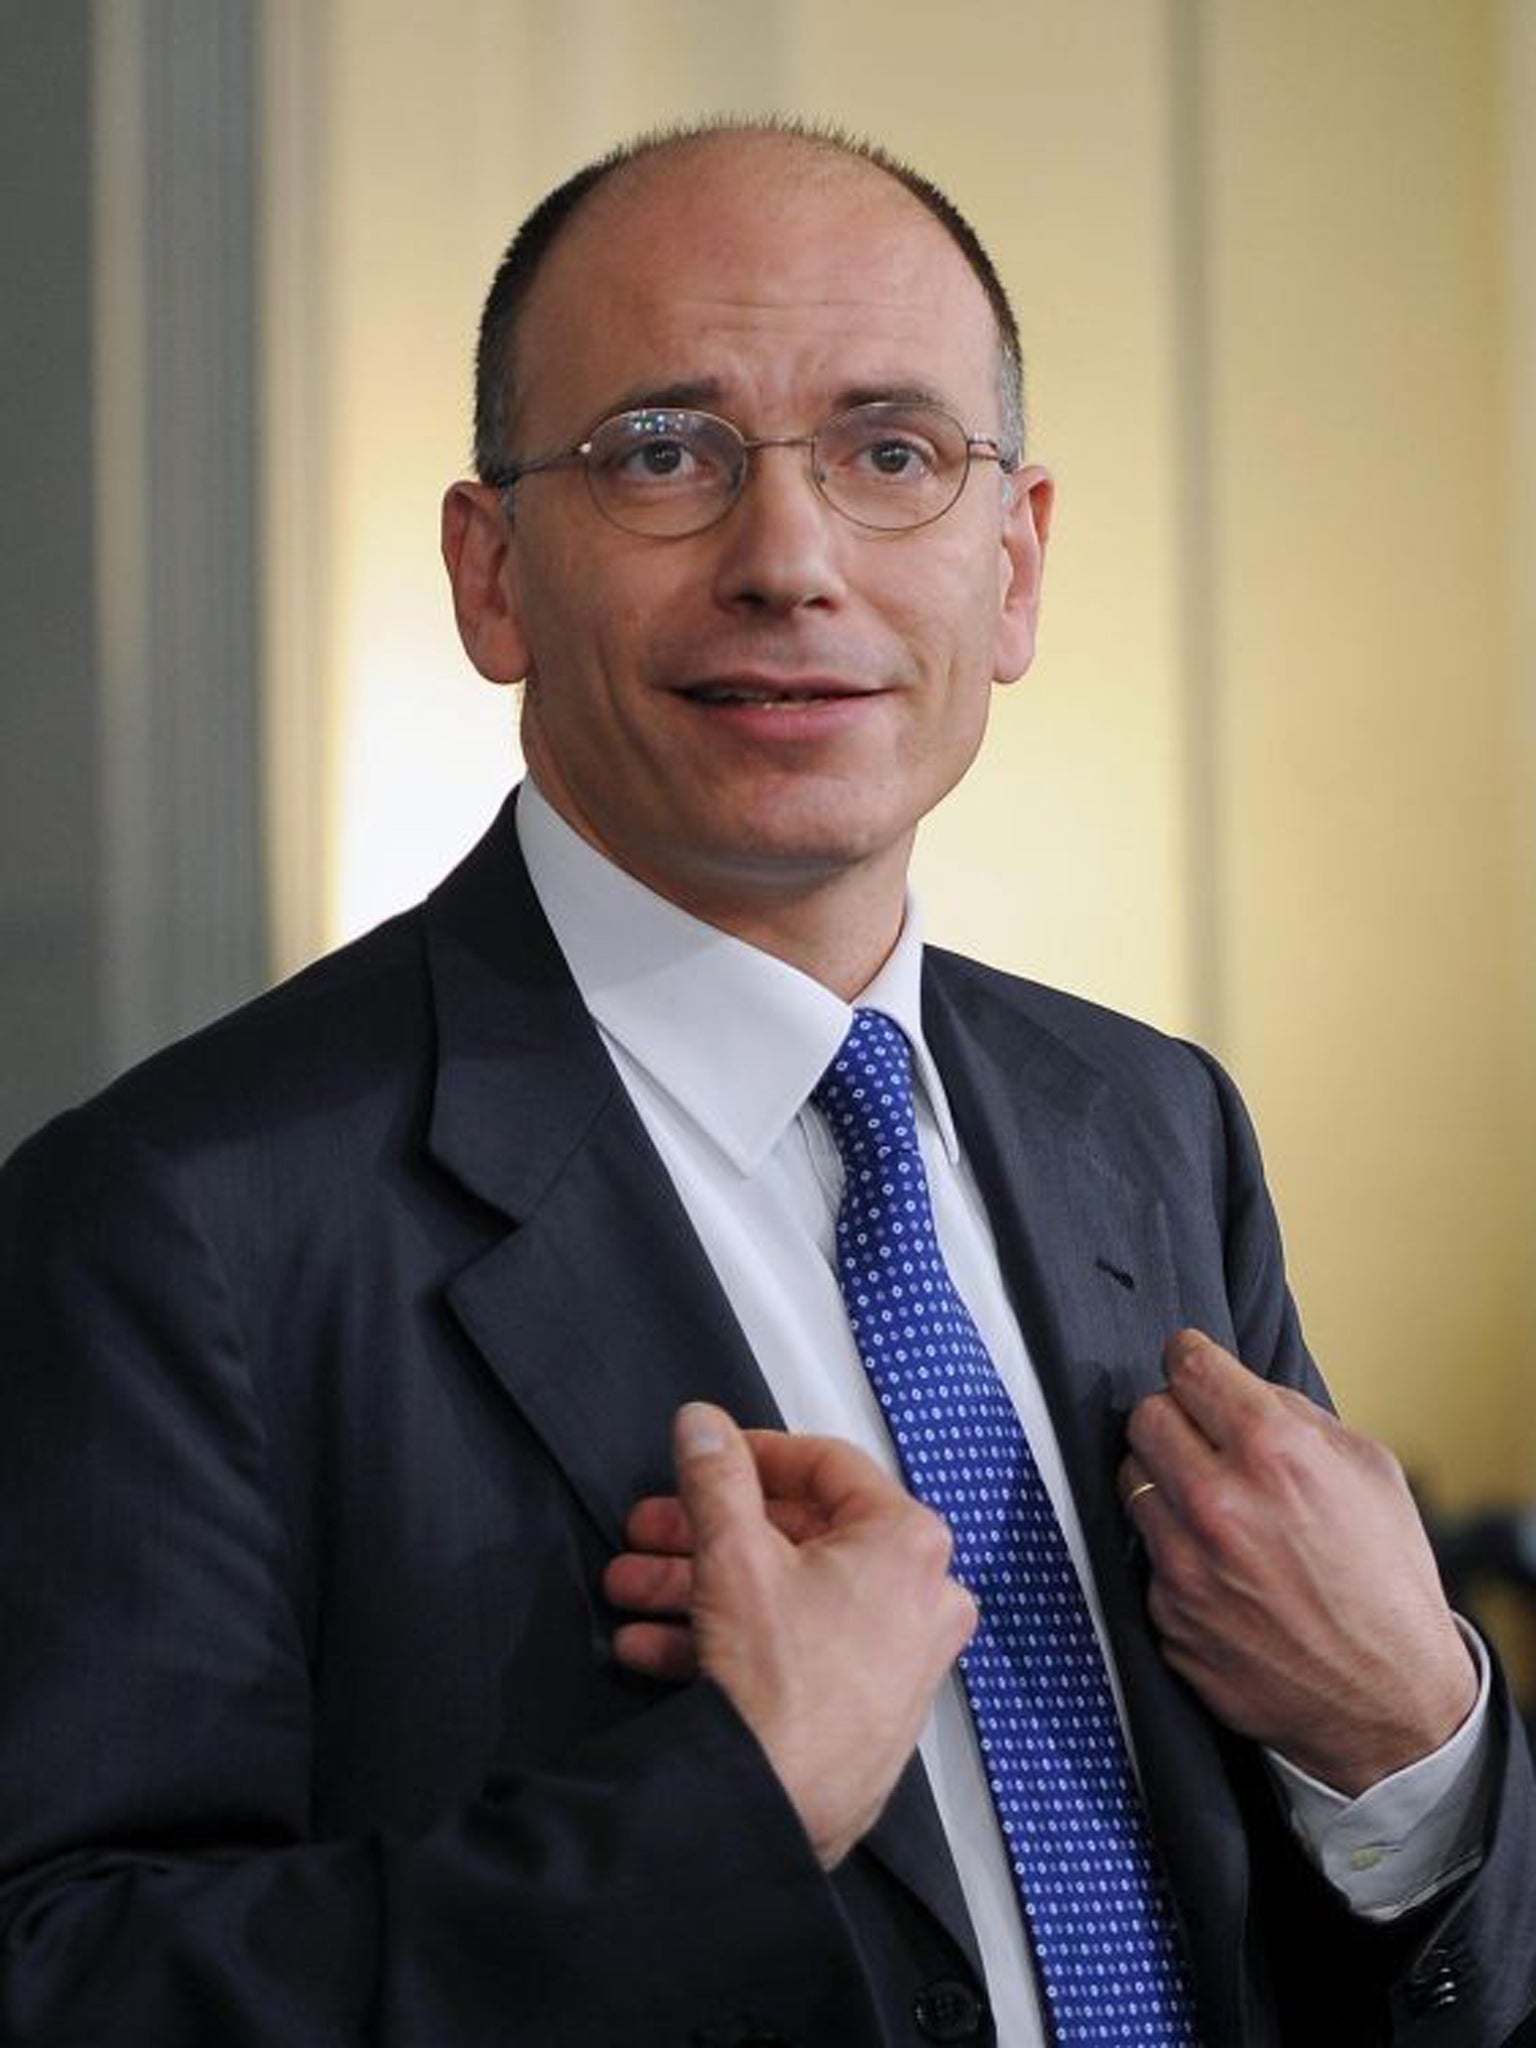 Enrico Letta, the former deputy leader of the centre-left Democratic party, is to form new government in Italy